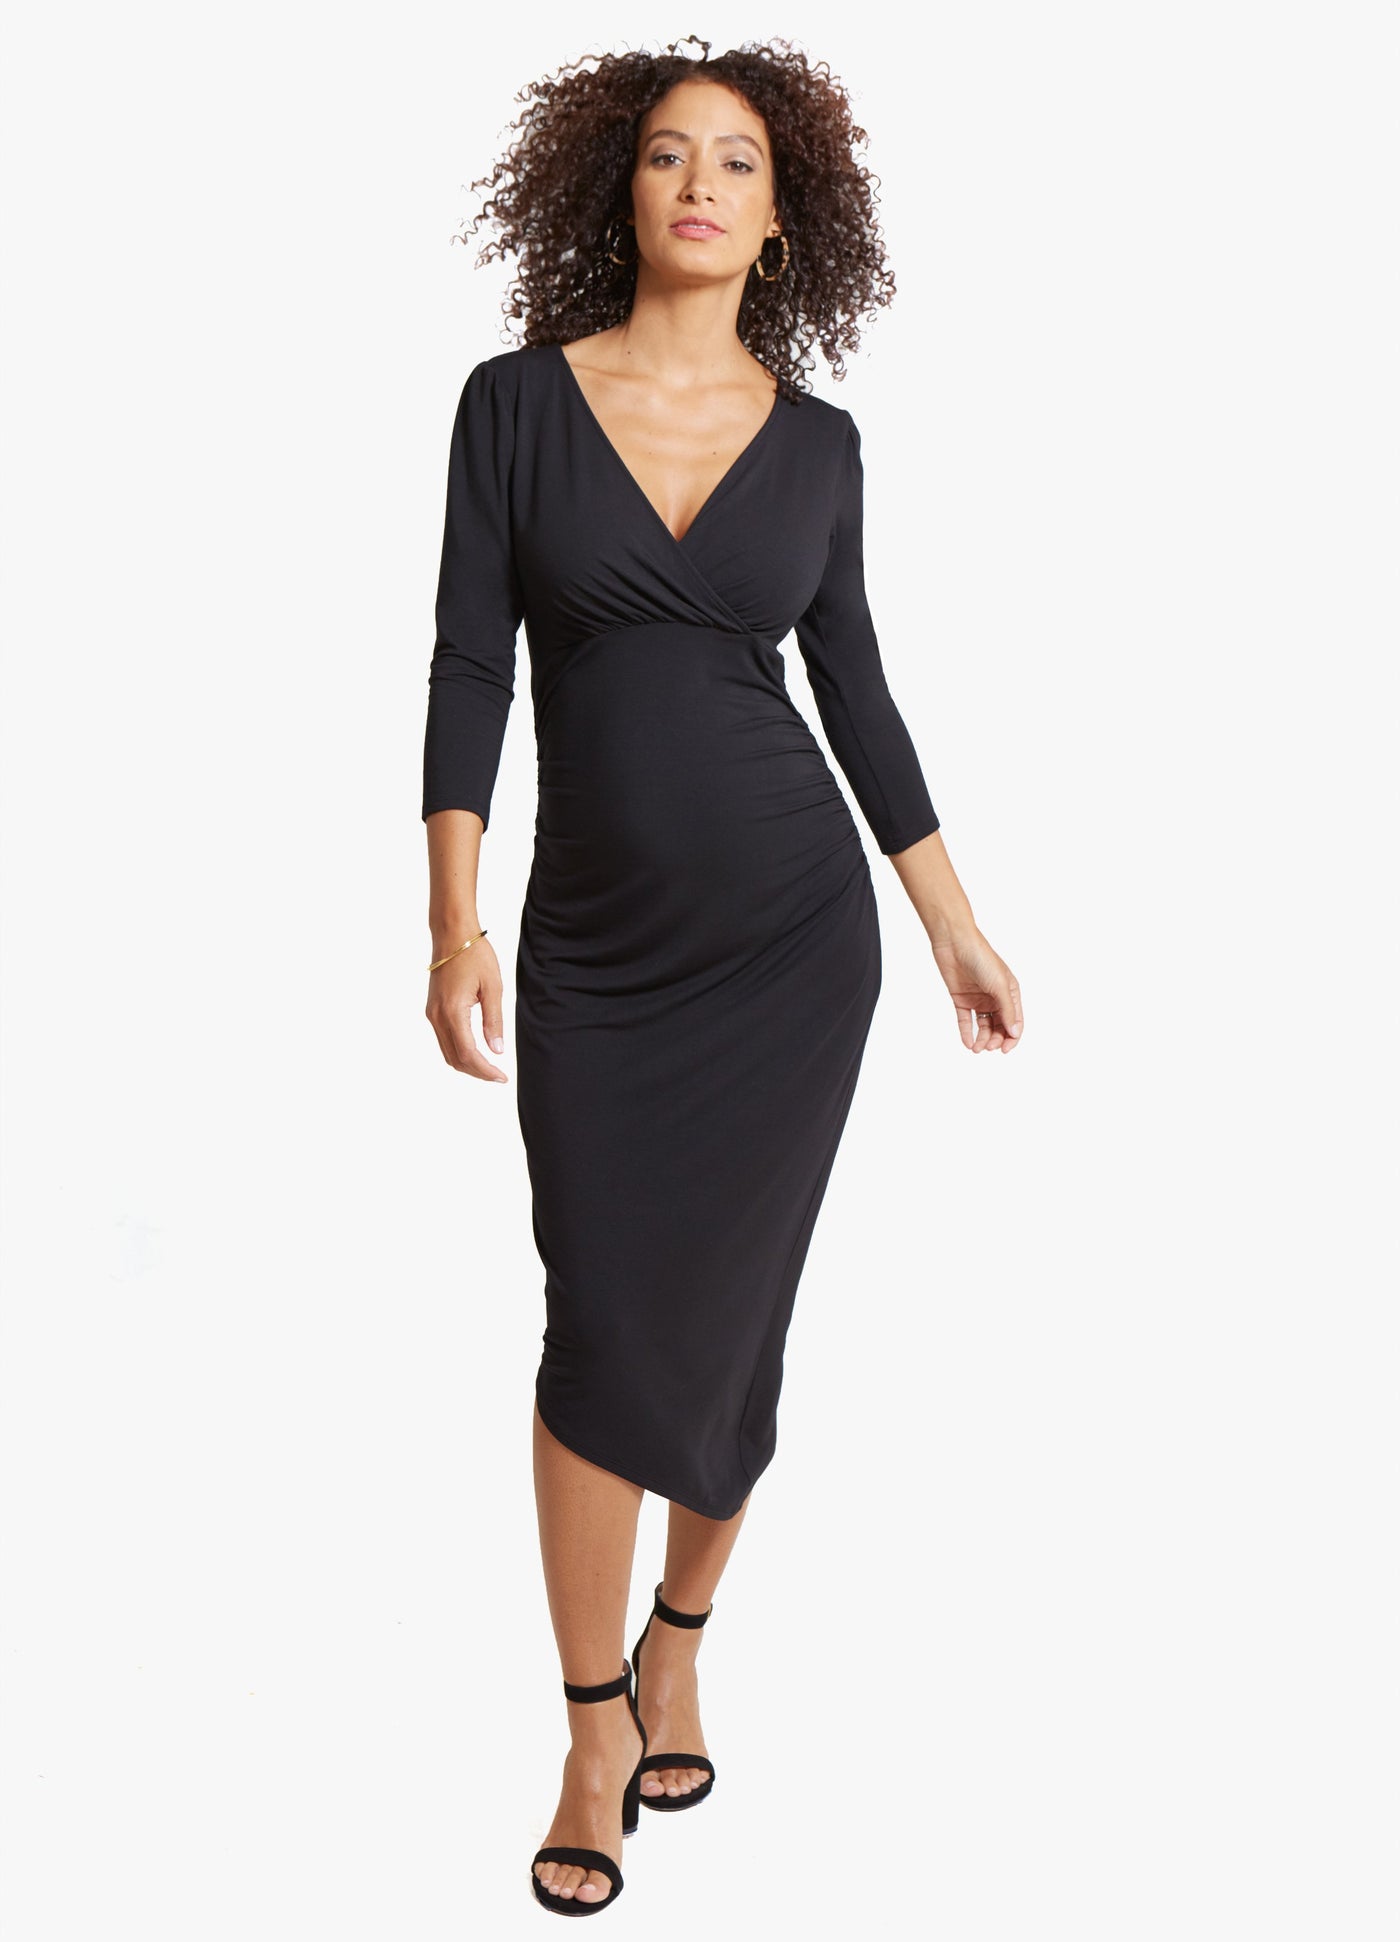 Model is 5’10”, 4 months pregnant, and wears size S.||Black